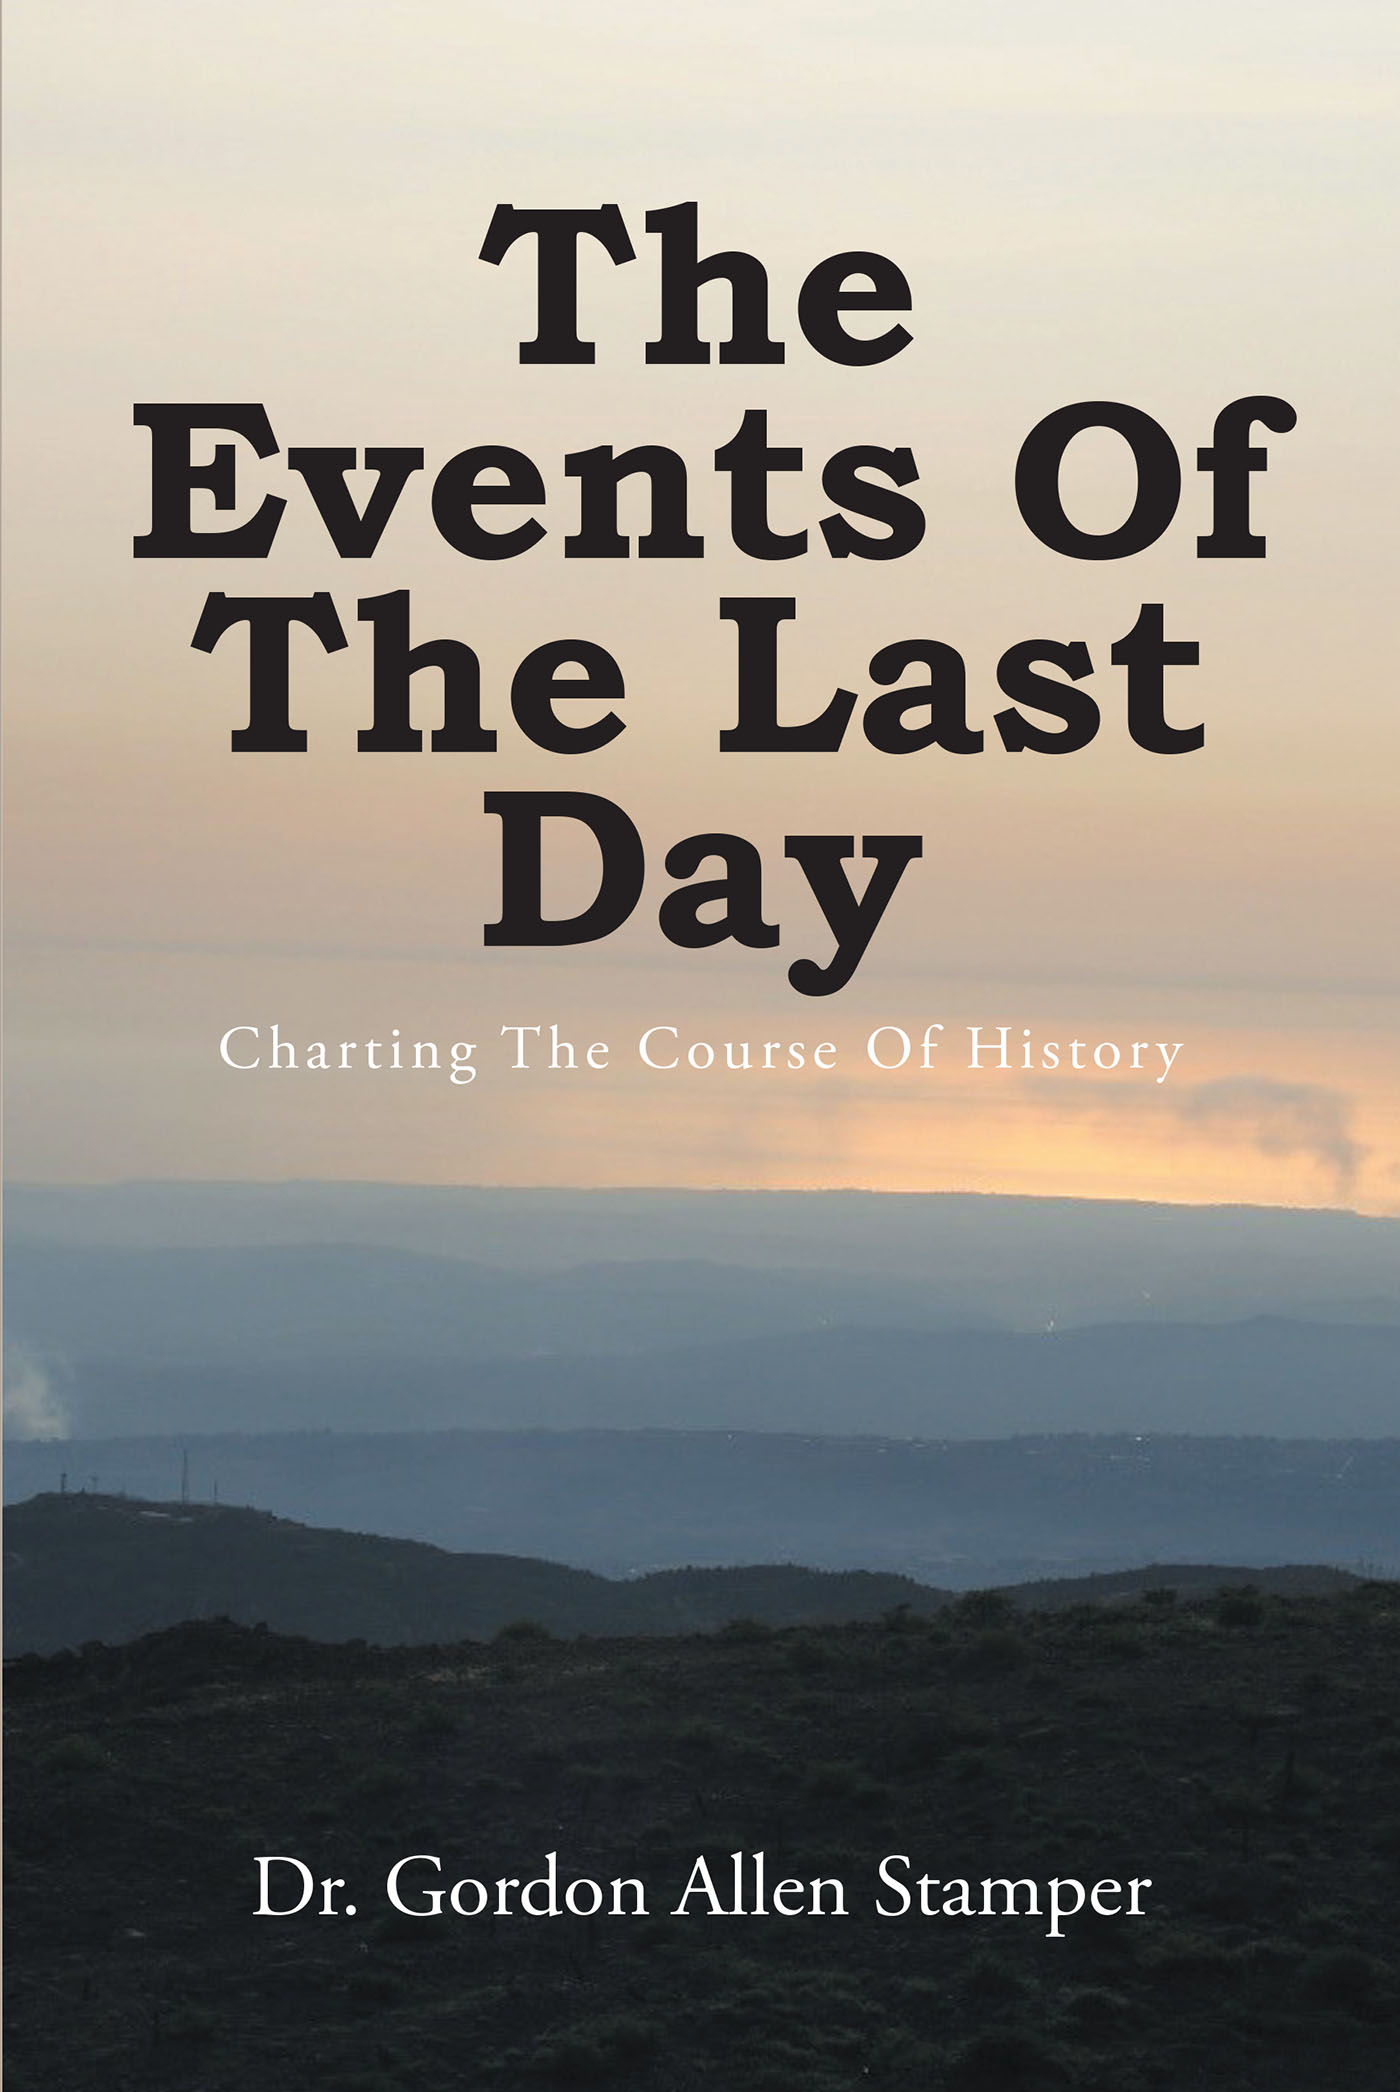 Dr. Gordon Allen Stamper’s Newly Released “The Events Of The Last Day: Charting The Course Of History” is an Empowering Message of Christ’s Love